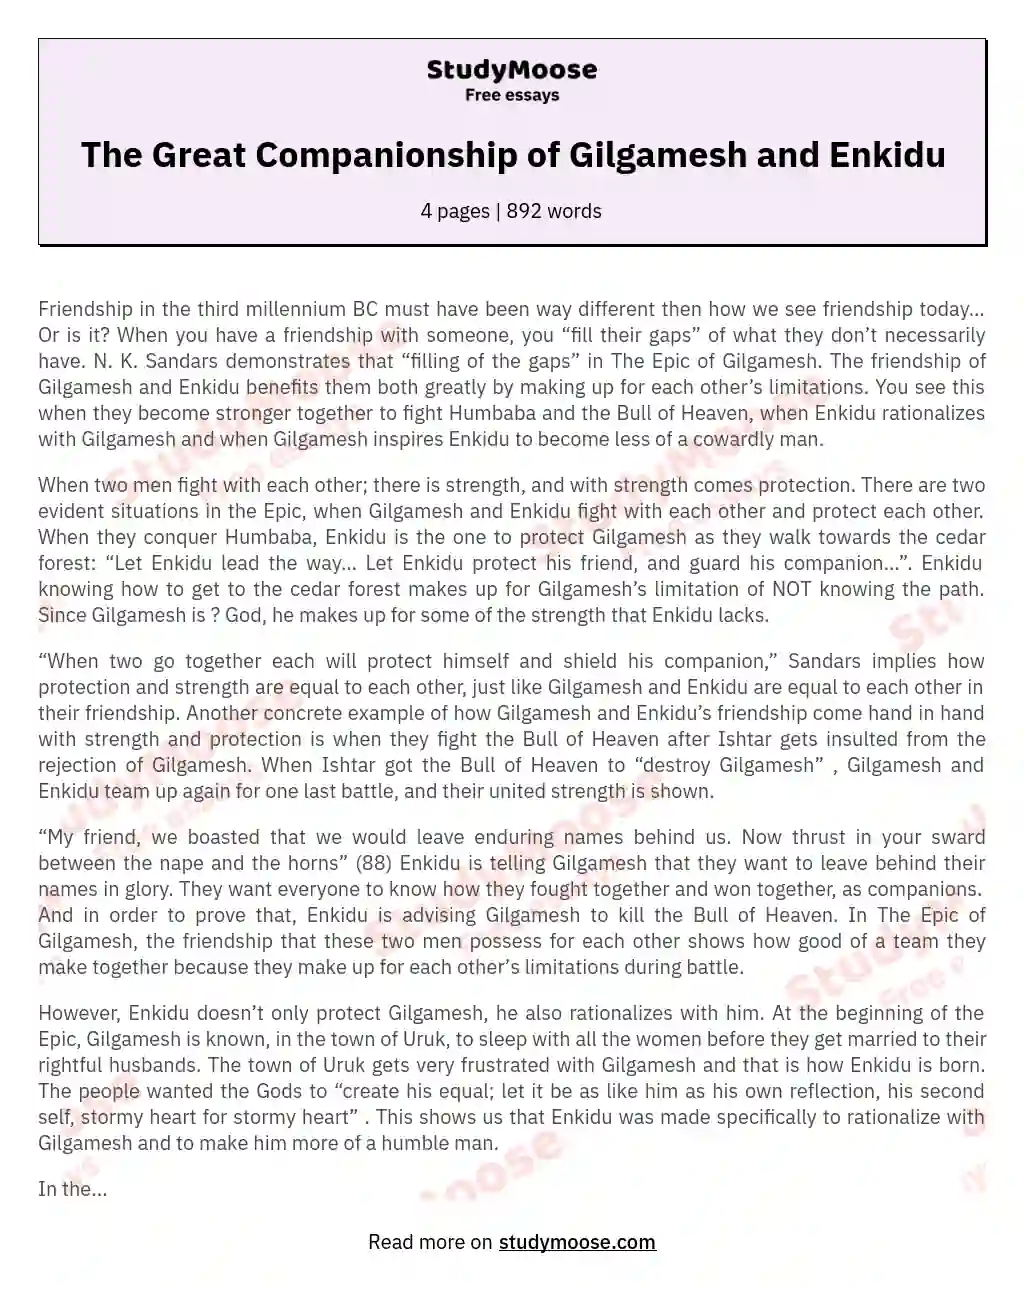 The Great Companionship of Gilgamesh and Enkidu essay